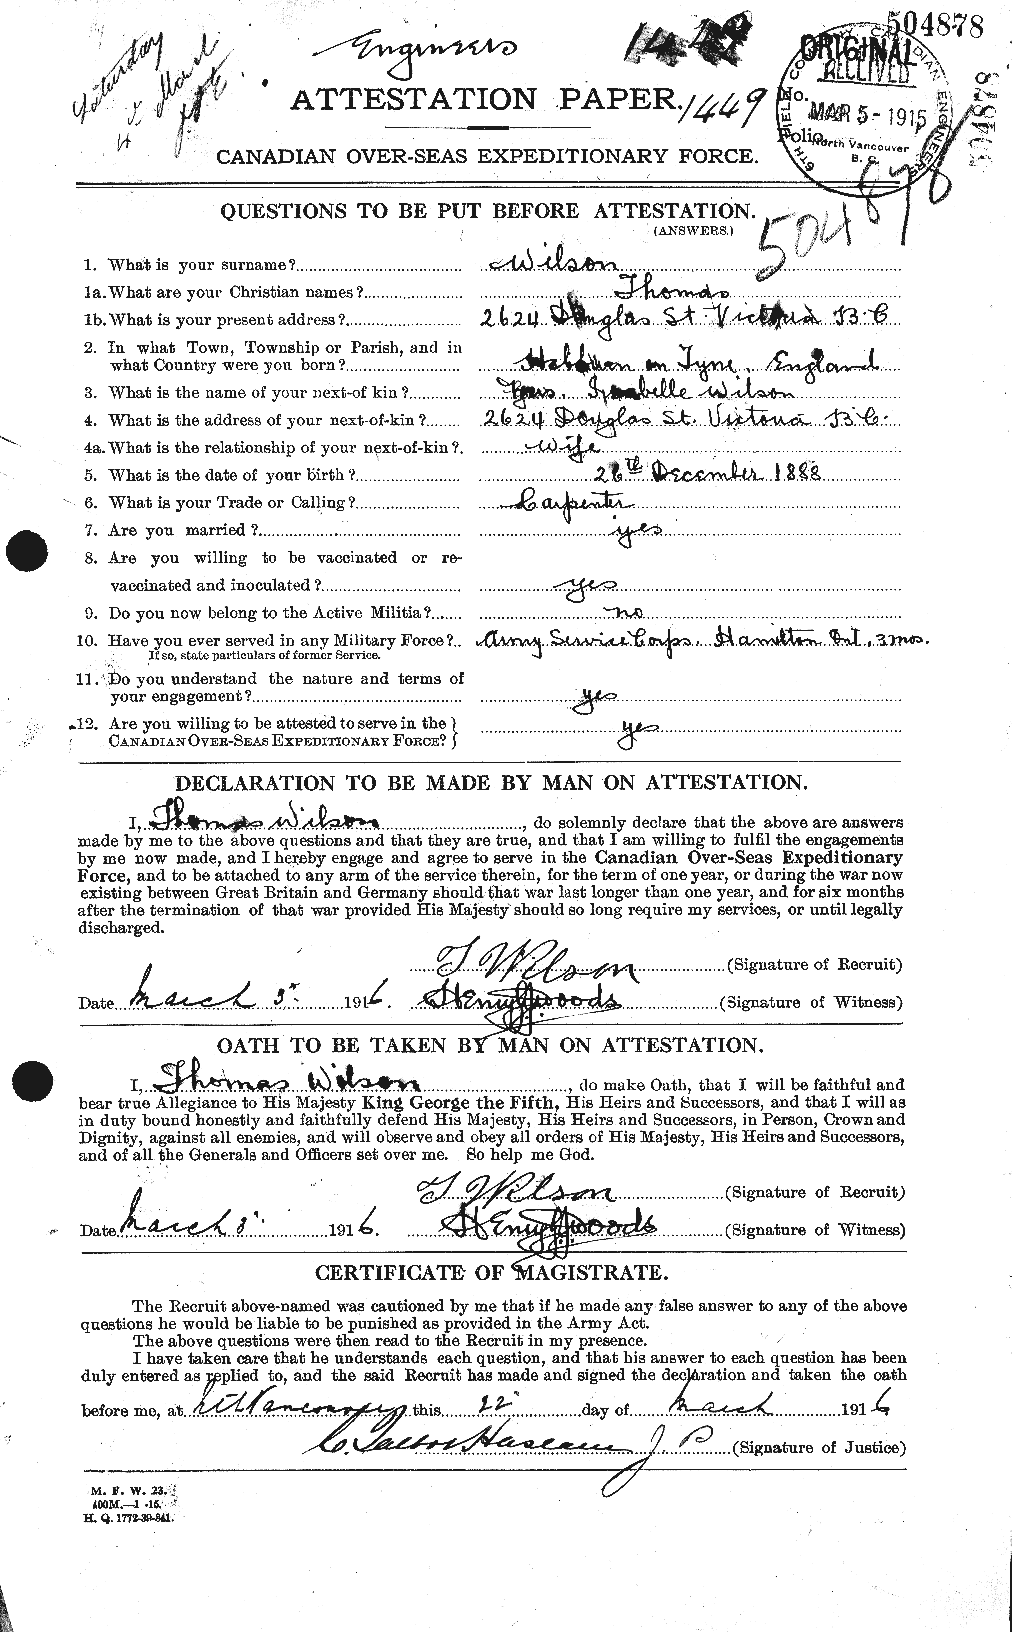 Personnel Records of the First World War - CEF 681225a